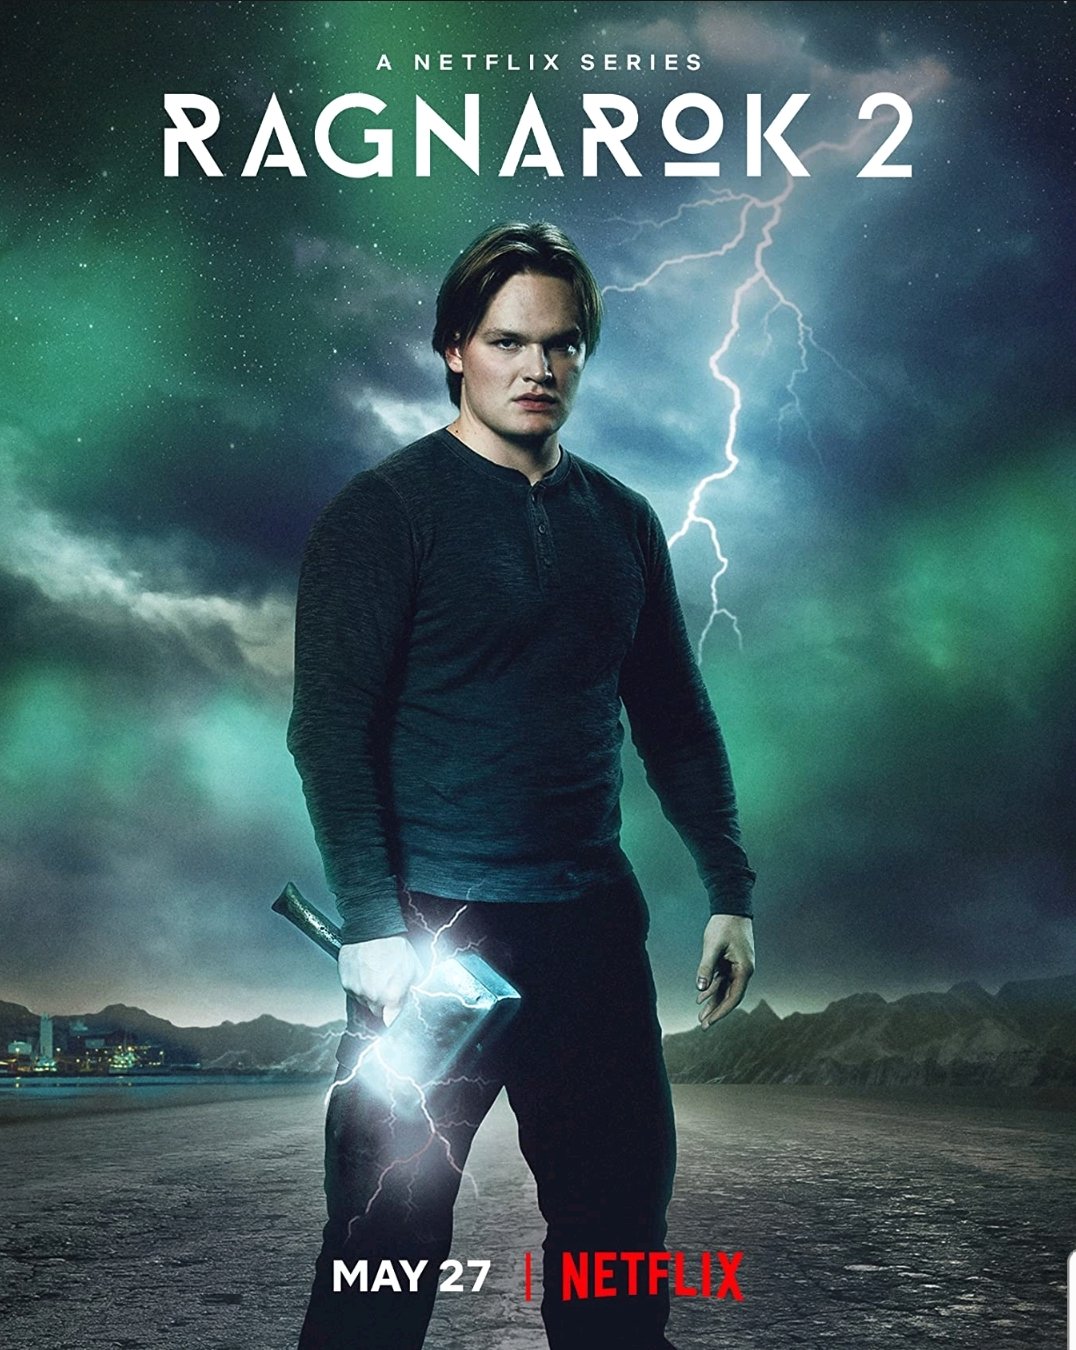 When is Record of Ragnarok season 2 part 2 out on Netflix?